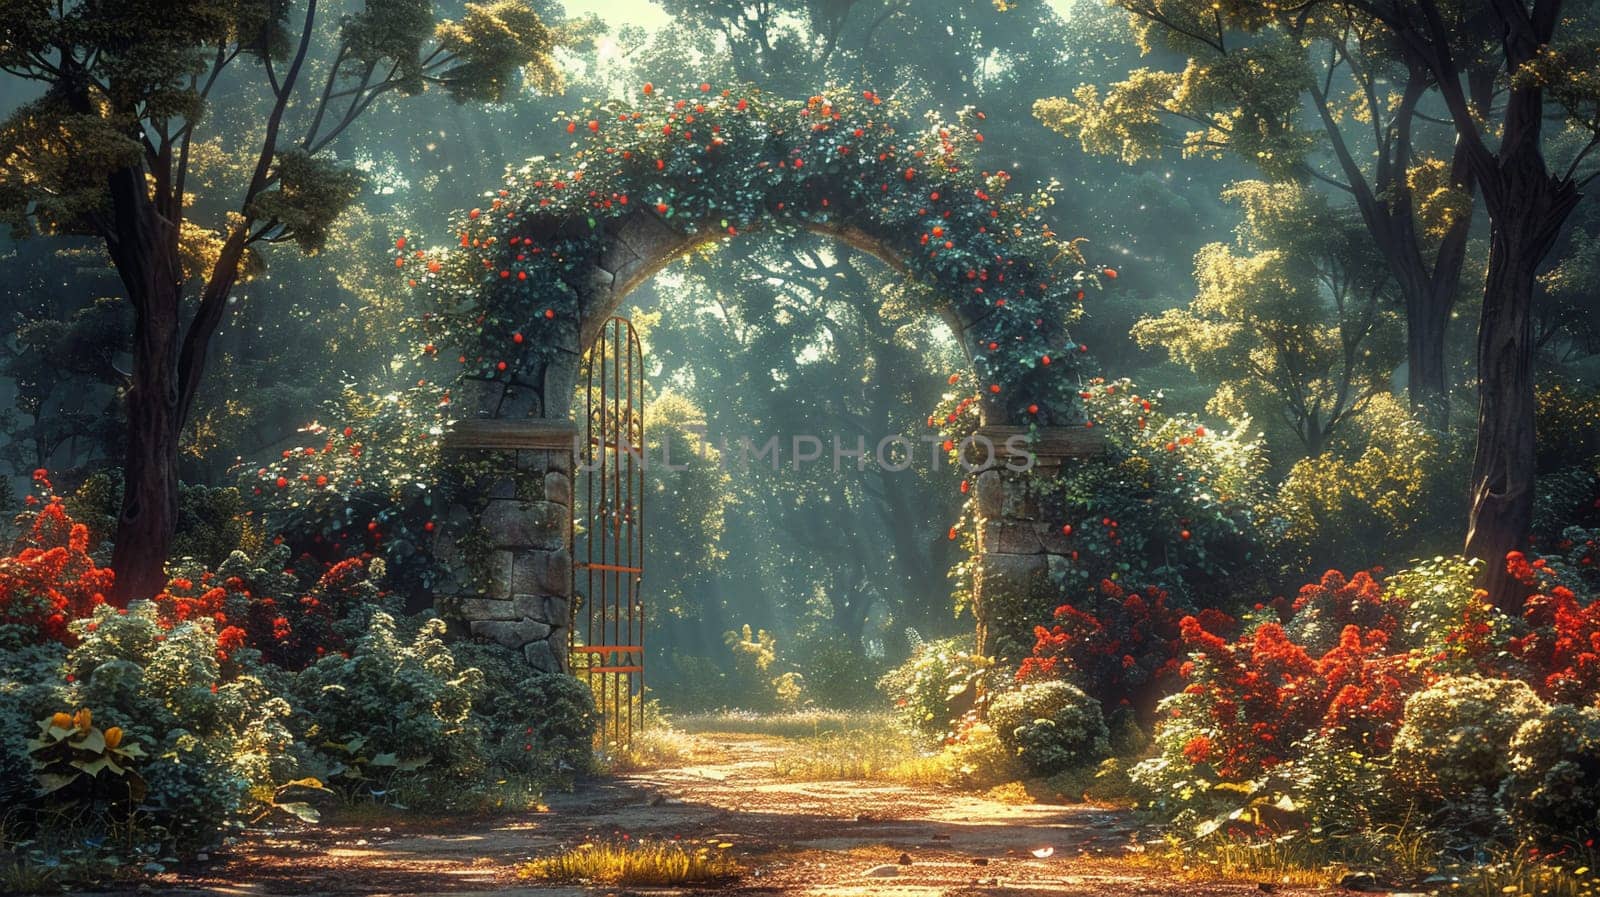 Secret garden gate partially open, inviting exploration, painted with a whimsical, storybook quality.